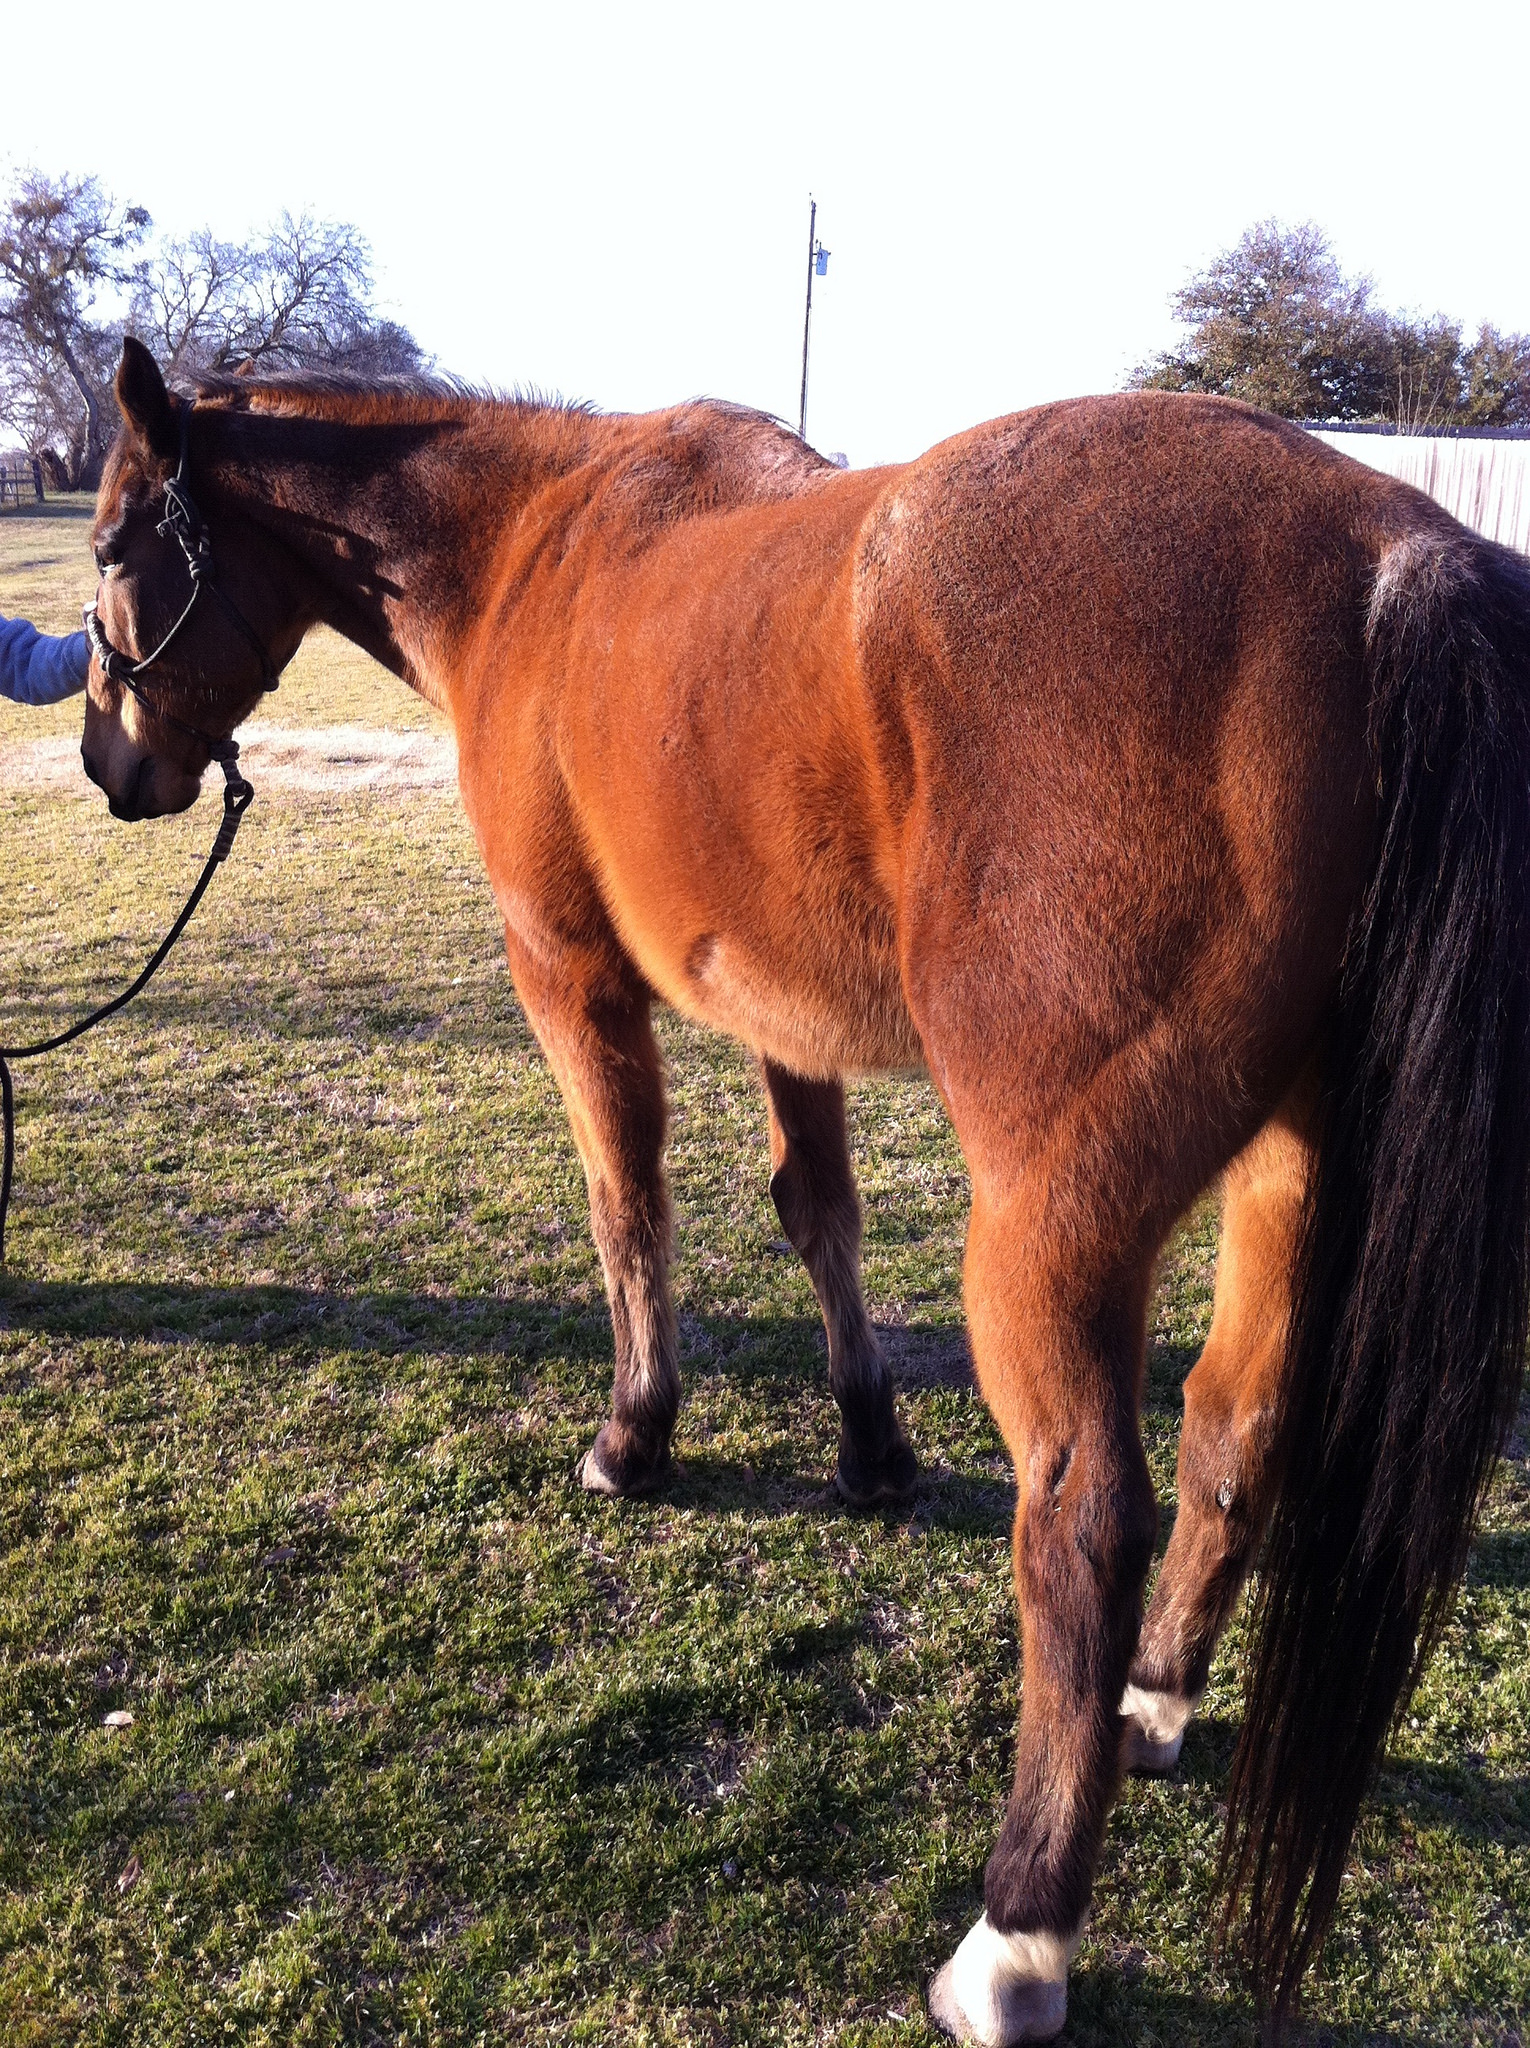 Big Sexy is a 18 year old head horse. Roped in original team roping series, Senior pro rodeo, local jackpots. Owned him for five years. Anyone can ride and rope on this guy  Very quit in the box, scores perfect. Runs strong. www.Cowboy4Sale.com